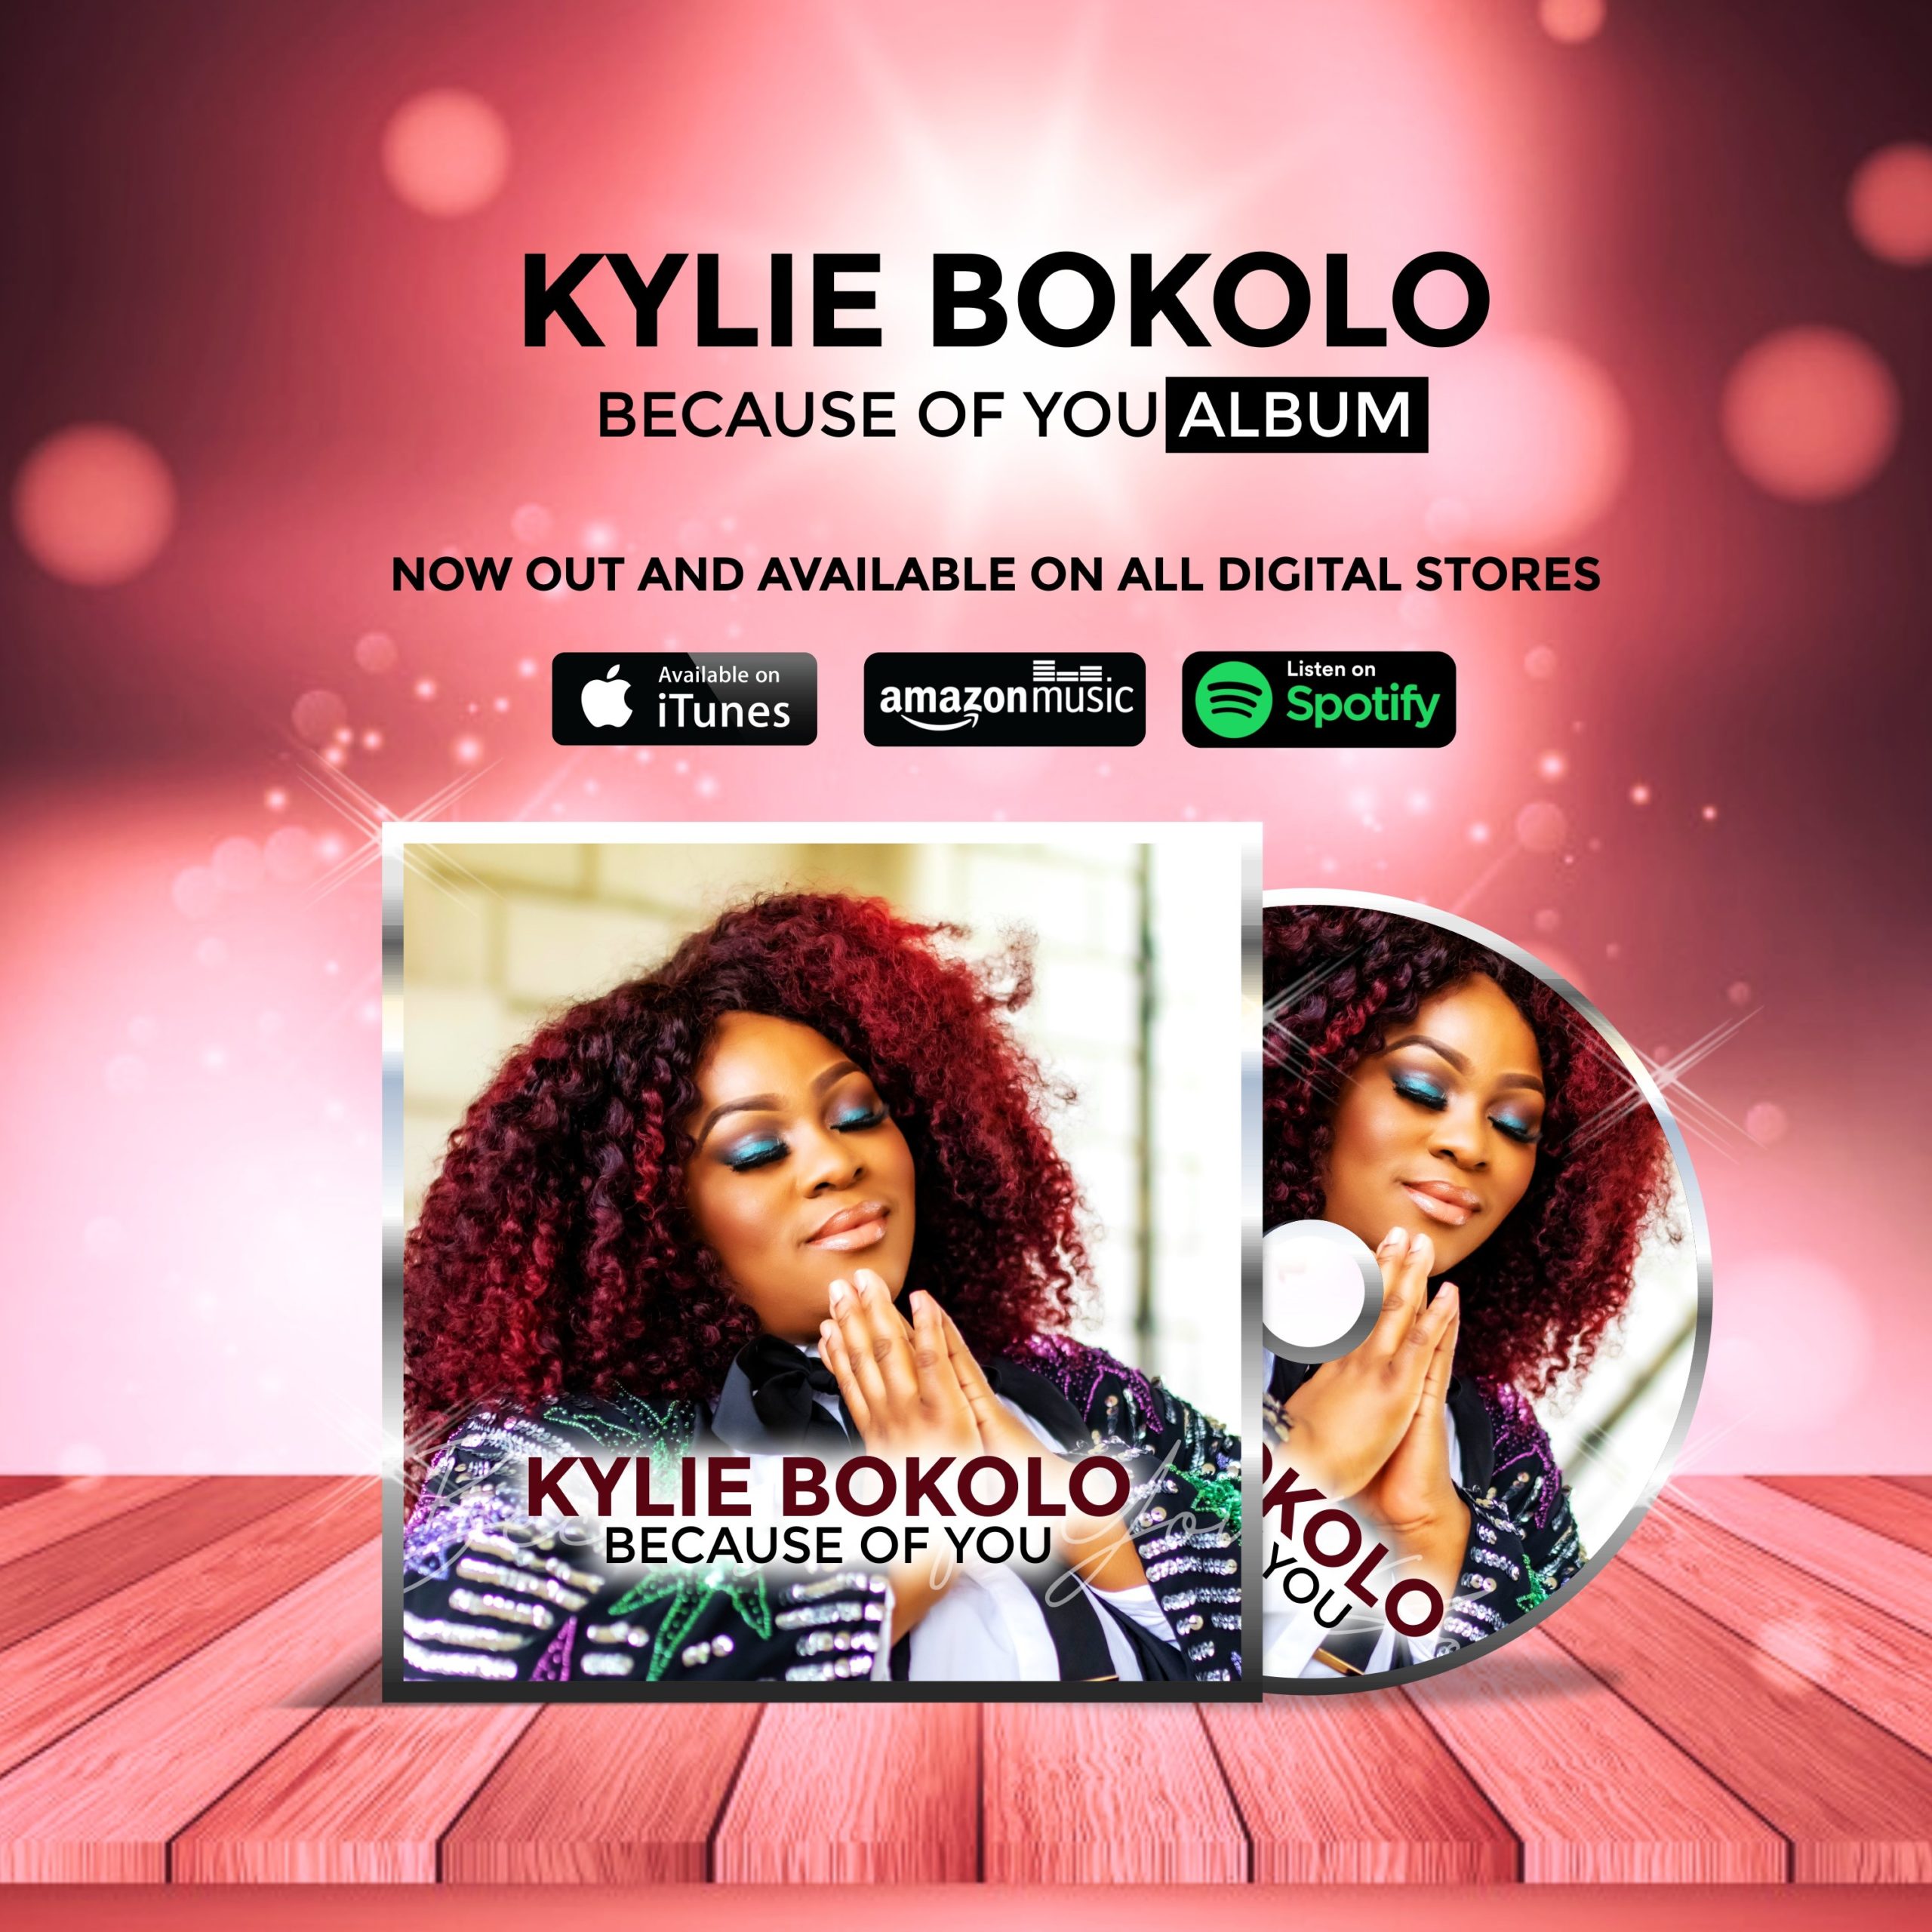 Kylie Bokolo Releases New Album titled "Because Of You"